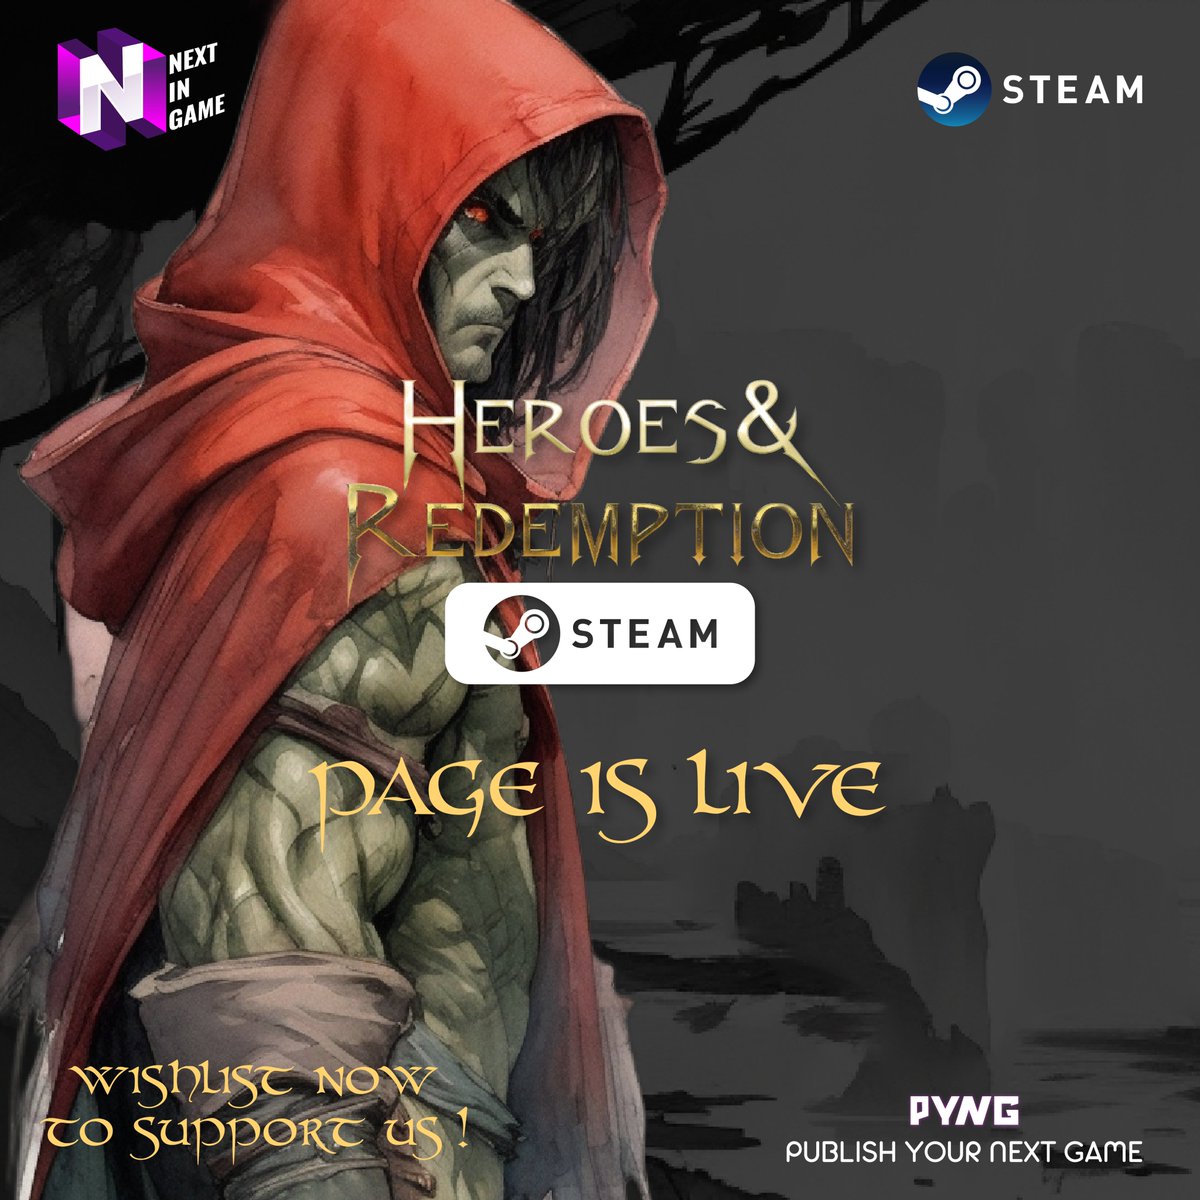 Embark on an endless journey through chaos in Heroes & Redemption, a rogue-lite bullet-hell game! 💥Face hordes of enemies, learn new abilities, and enhance your skills! Show your support by adding it to your wishlist now! store.steampowered.com/app/2516980/He… #RogueLite #indiegame #PYNG